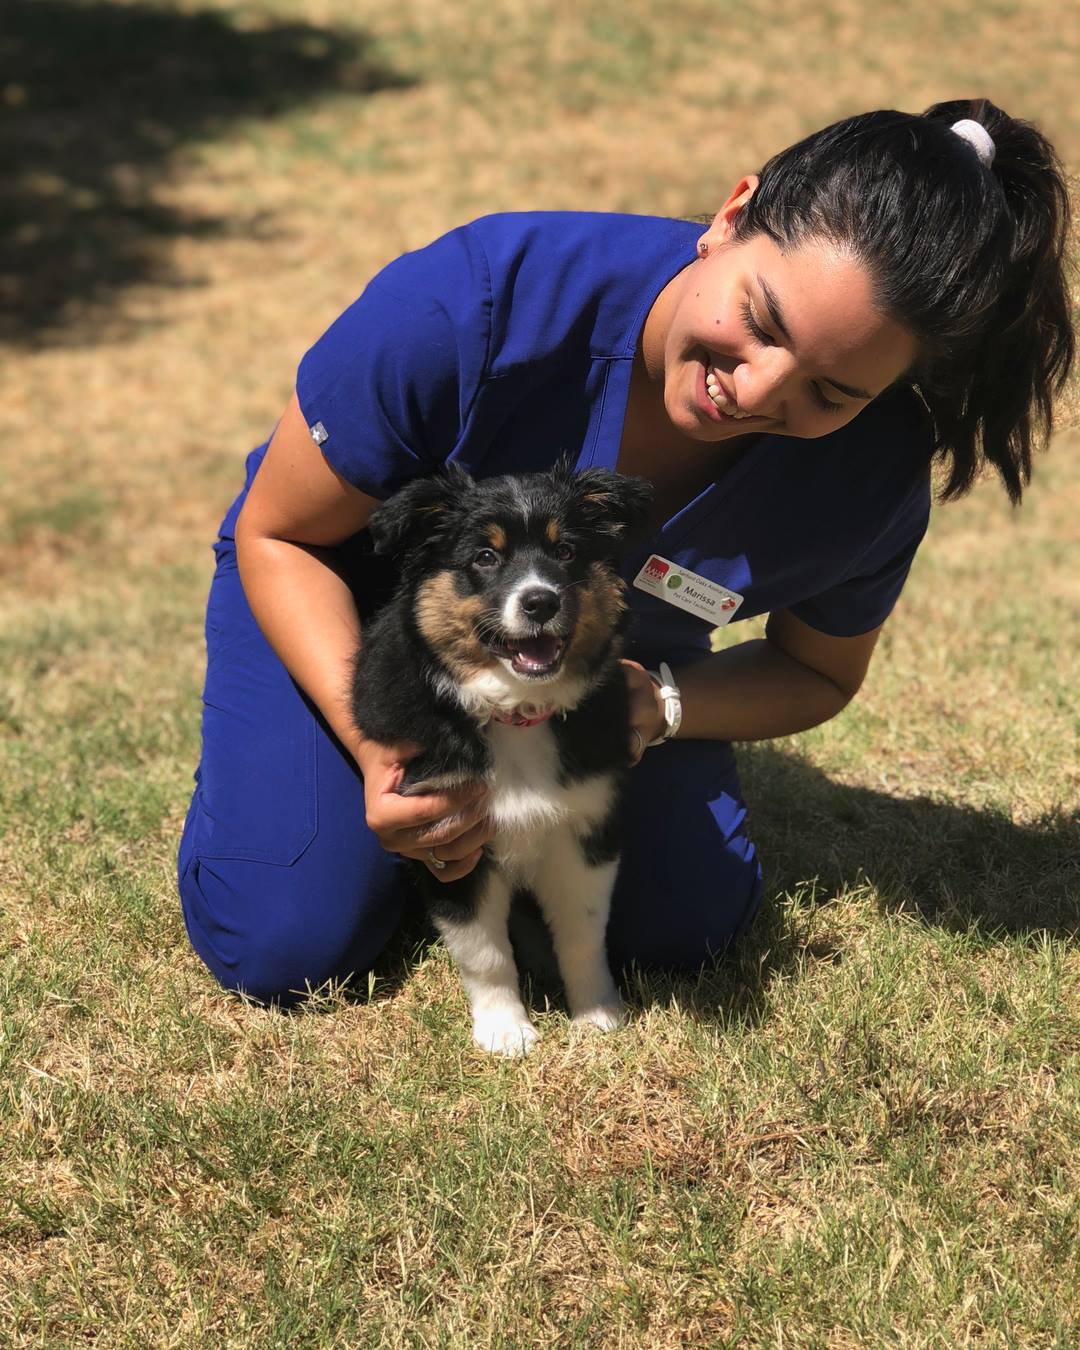 Veterinary team member playing with puppy outdoors